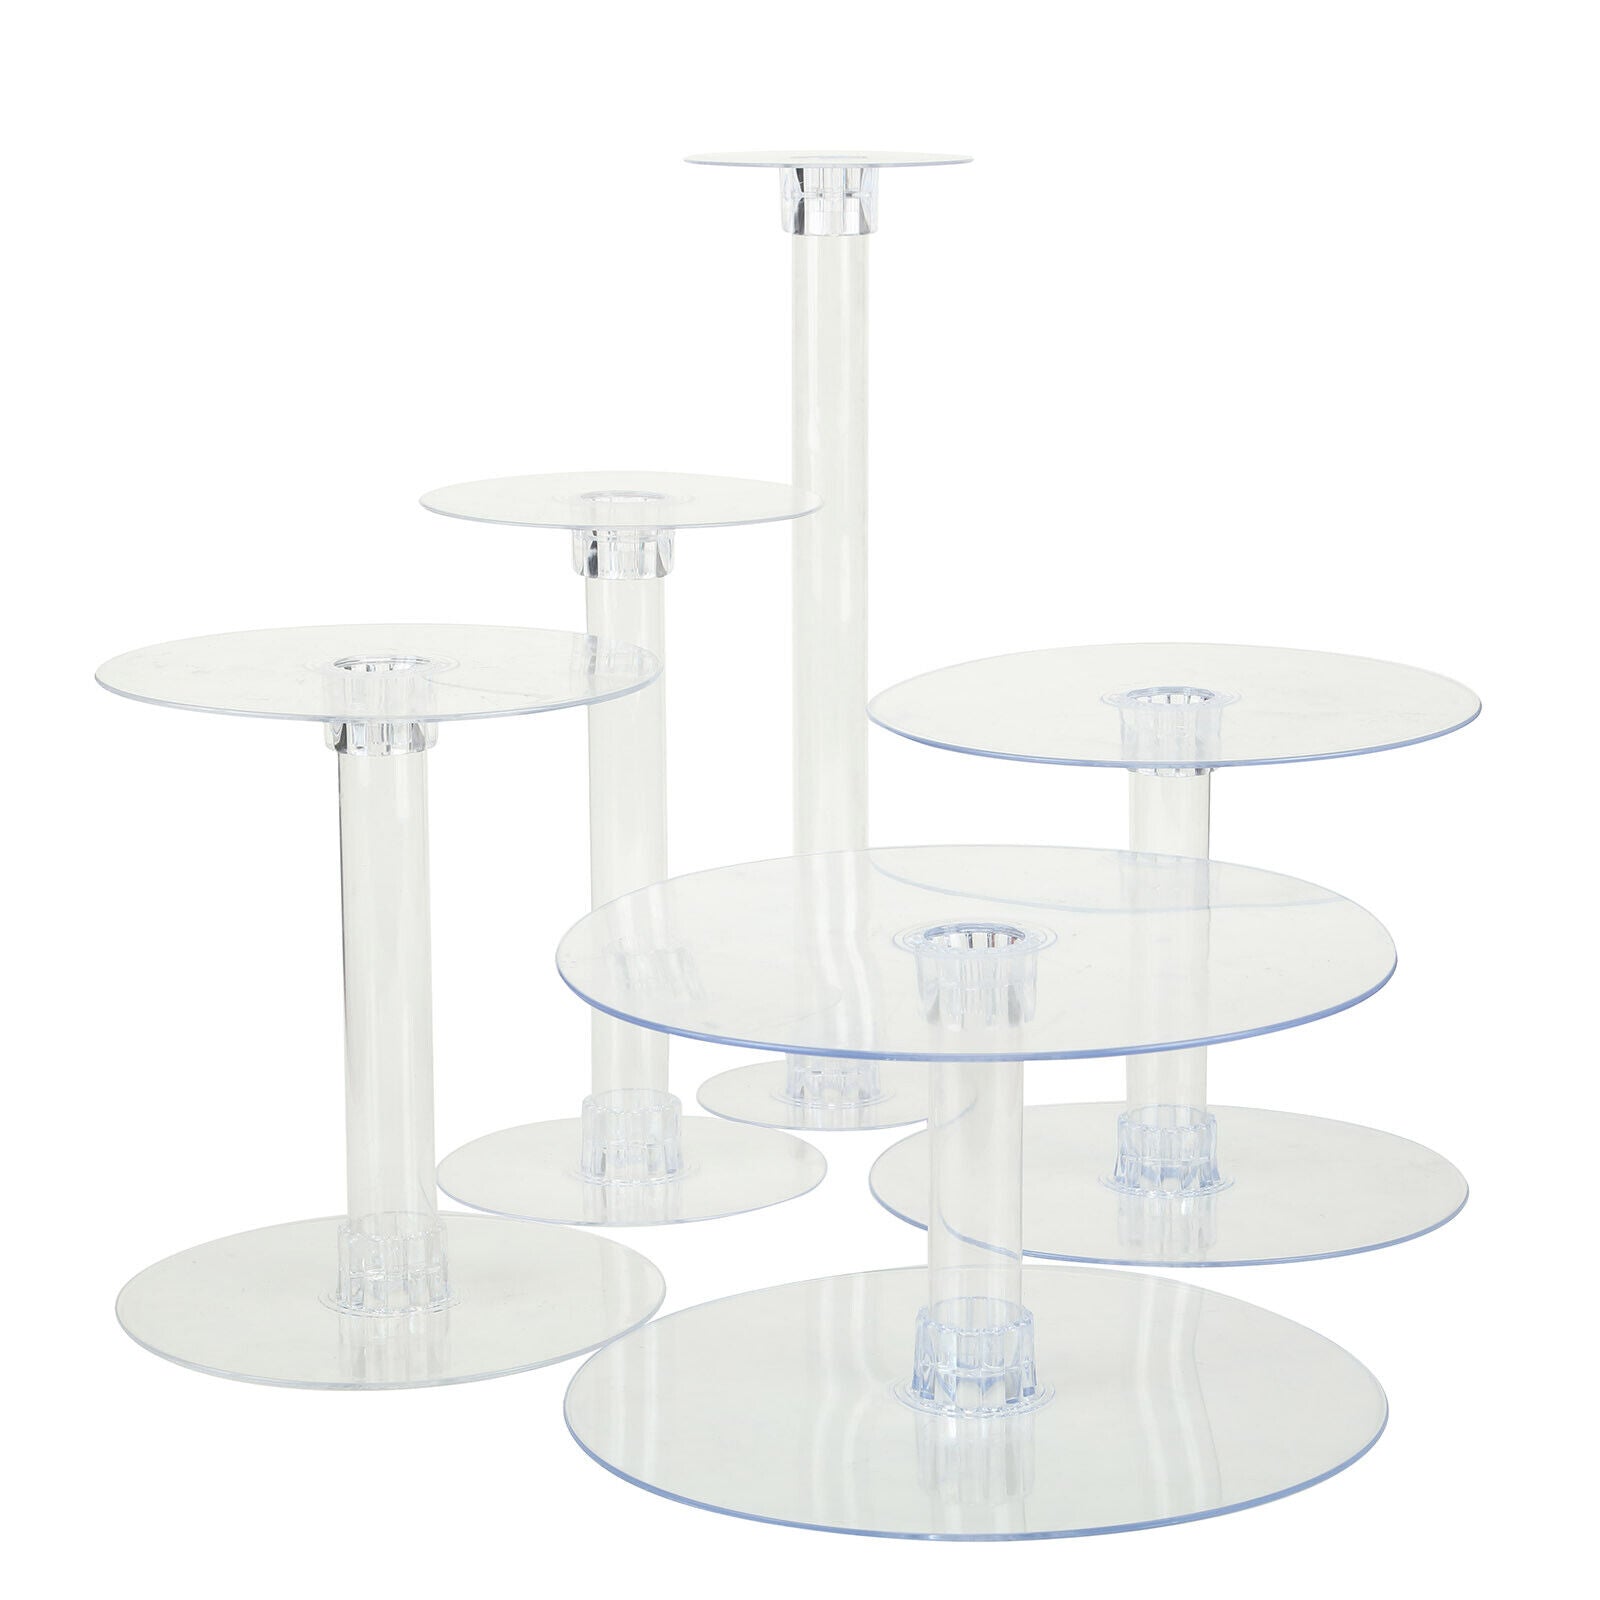 5 Tiers Acrylic Cake Stand Set Birthday Party Catering Display